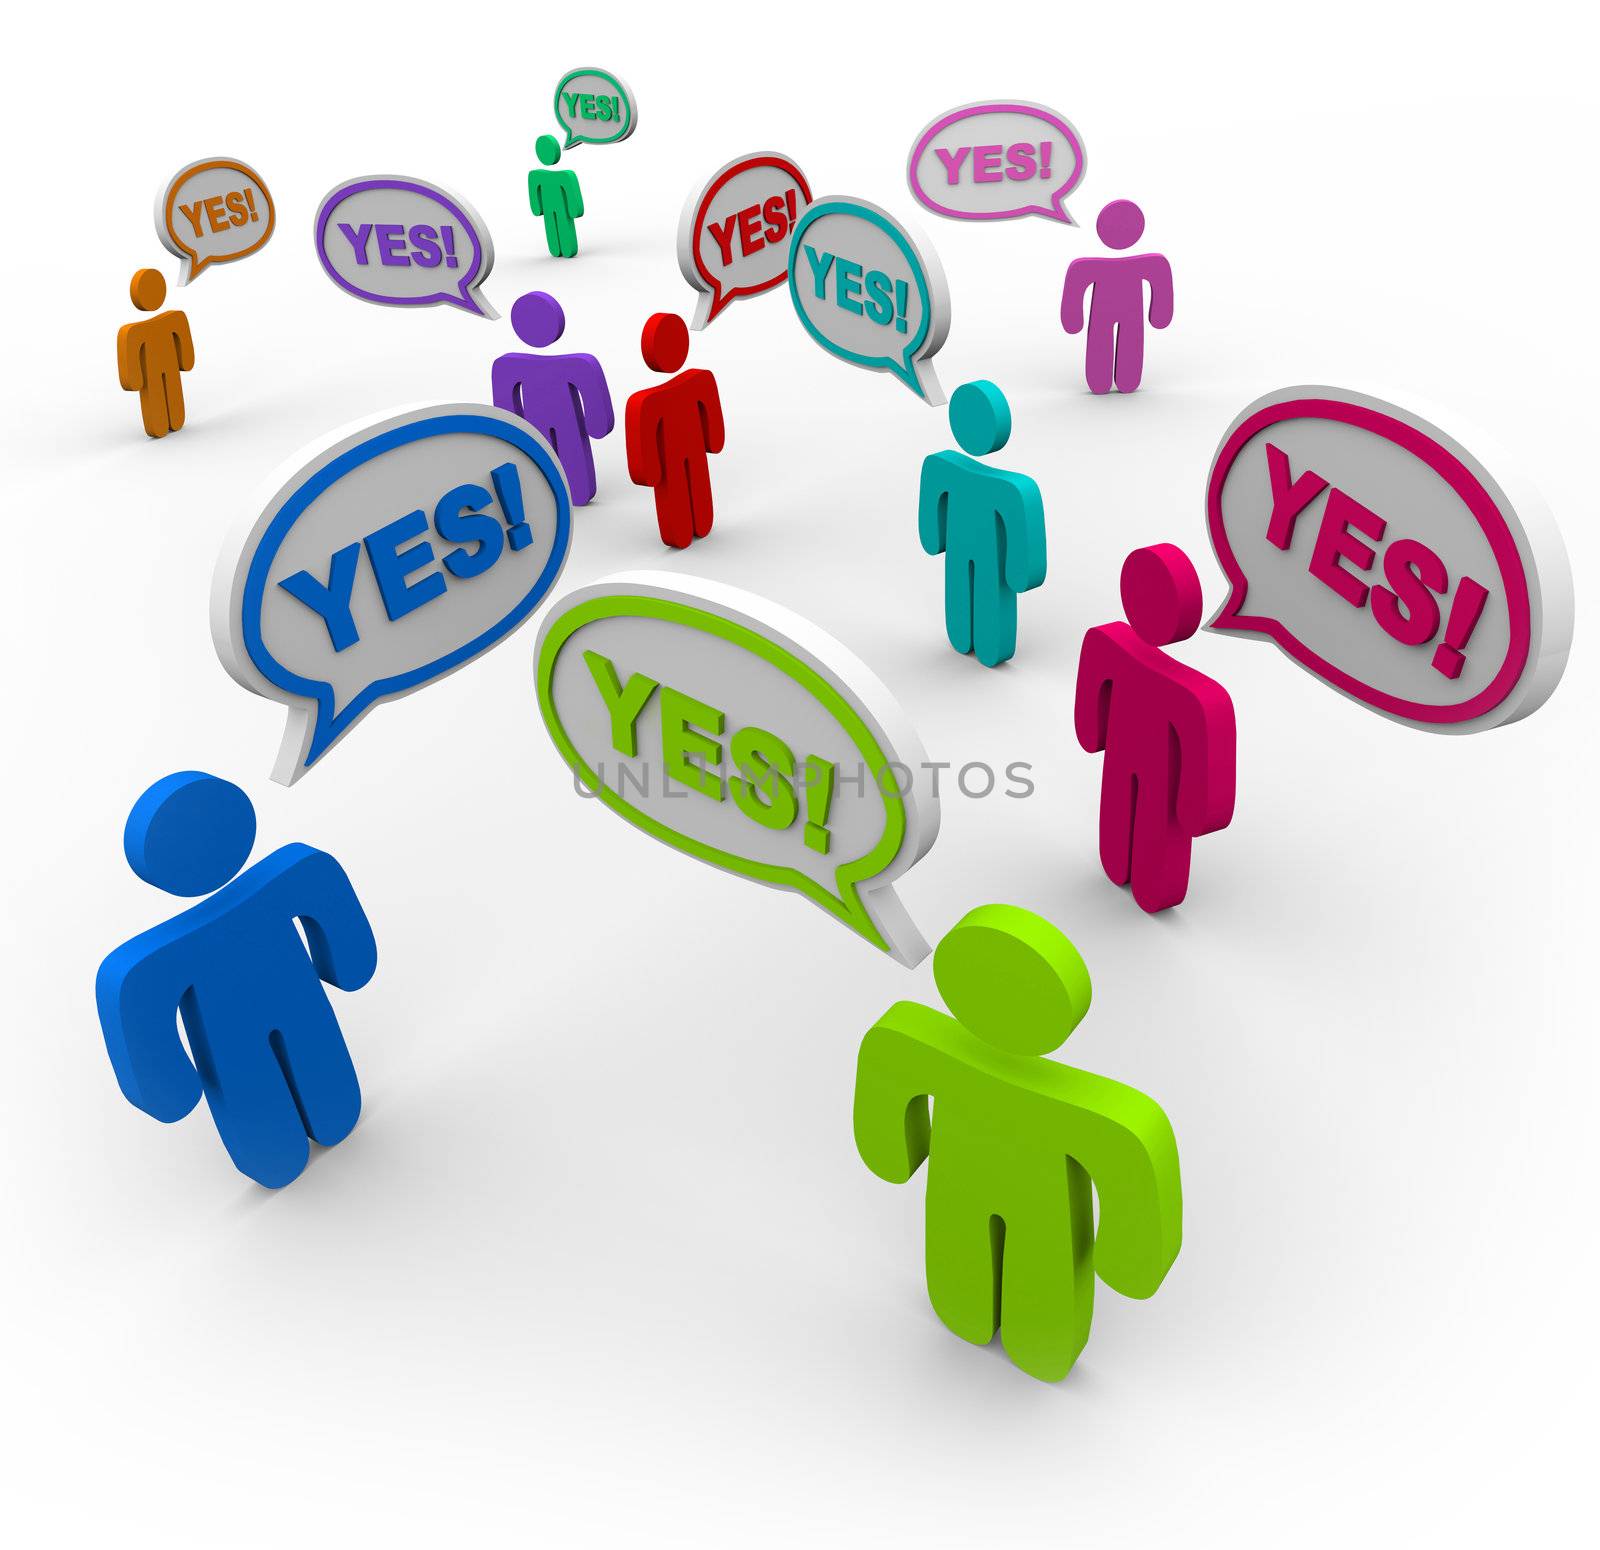 Many people talking at the same time, pledging their support or approval with the word Yes repeated in several speech bubbles